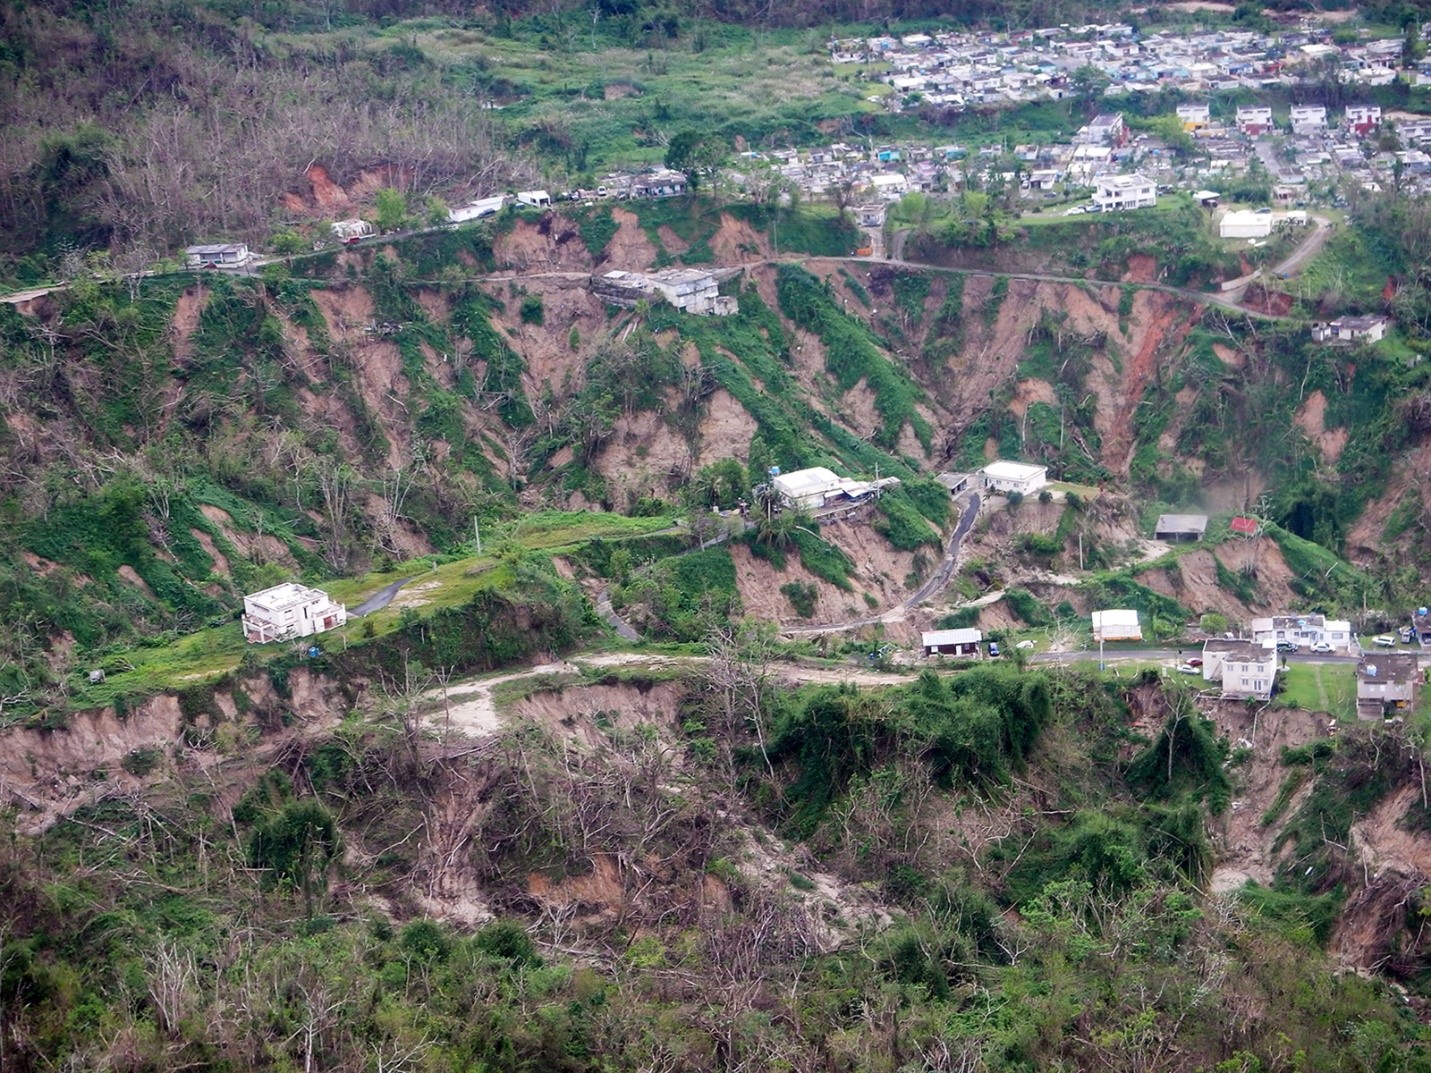 An aerial view of landslide damage after 2017’s Hurricane Maria in Utuado municipality, Puerto Rico